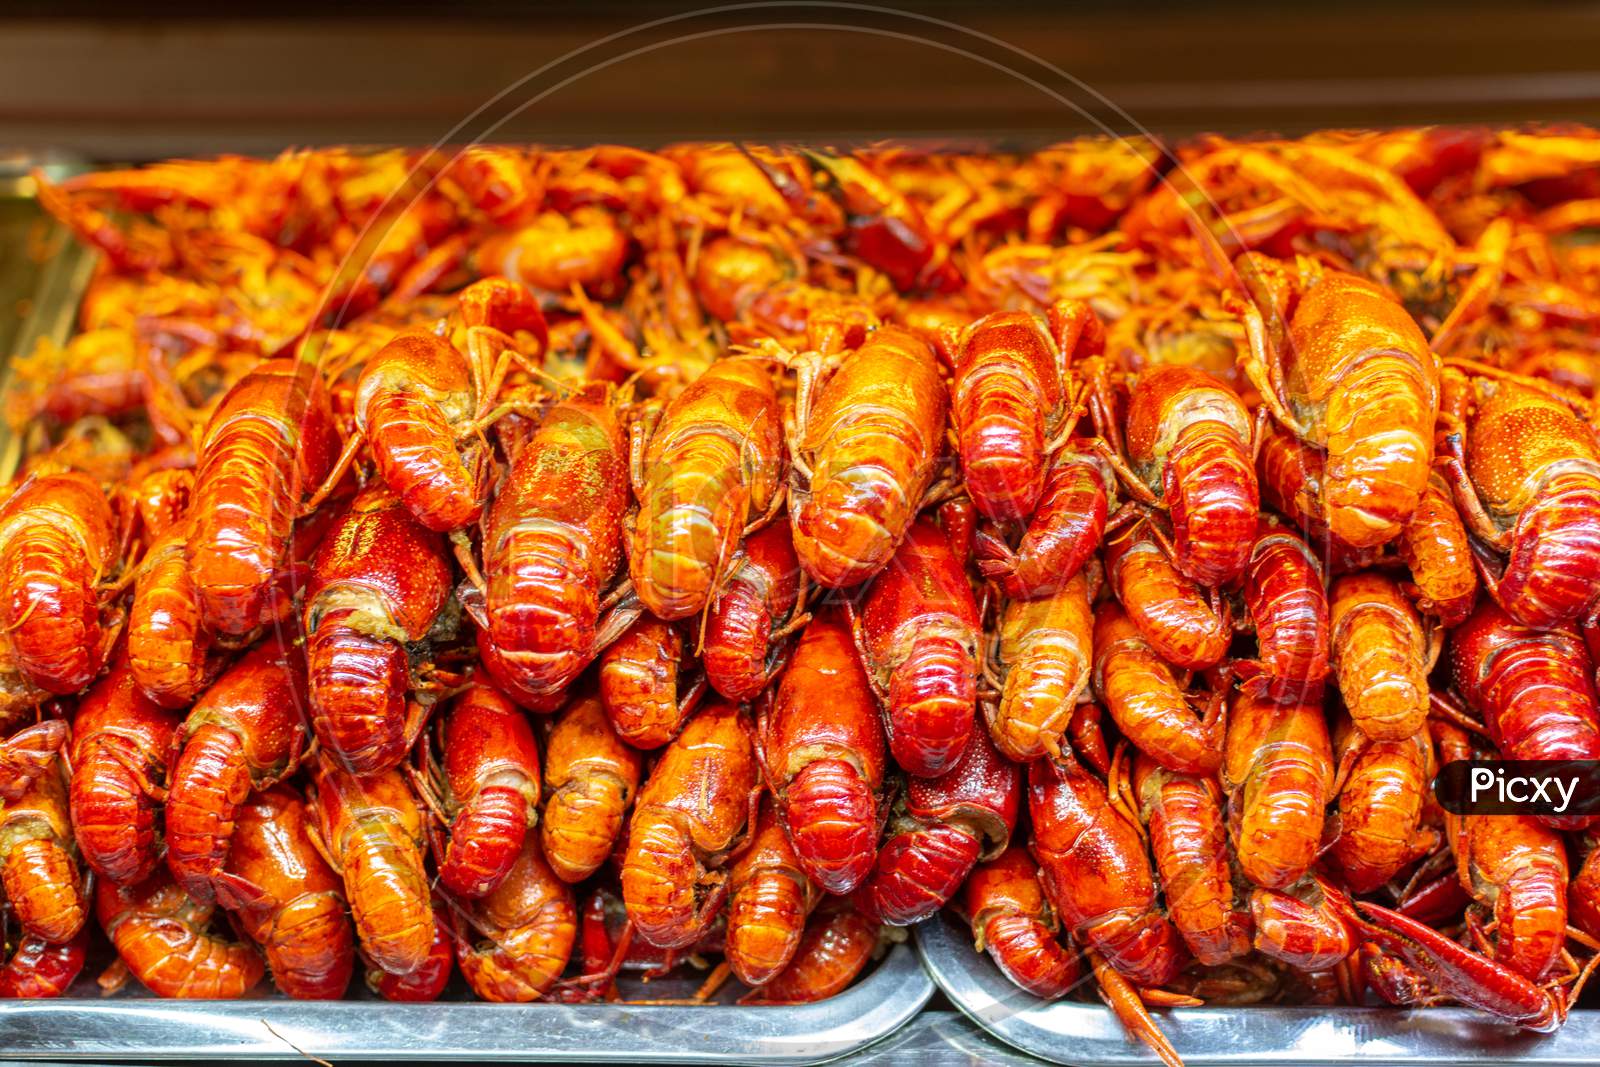 Prawns On Sale At The Street Market Food Stall In Luoyang Old City, Henan, China